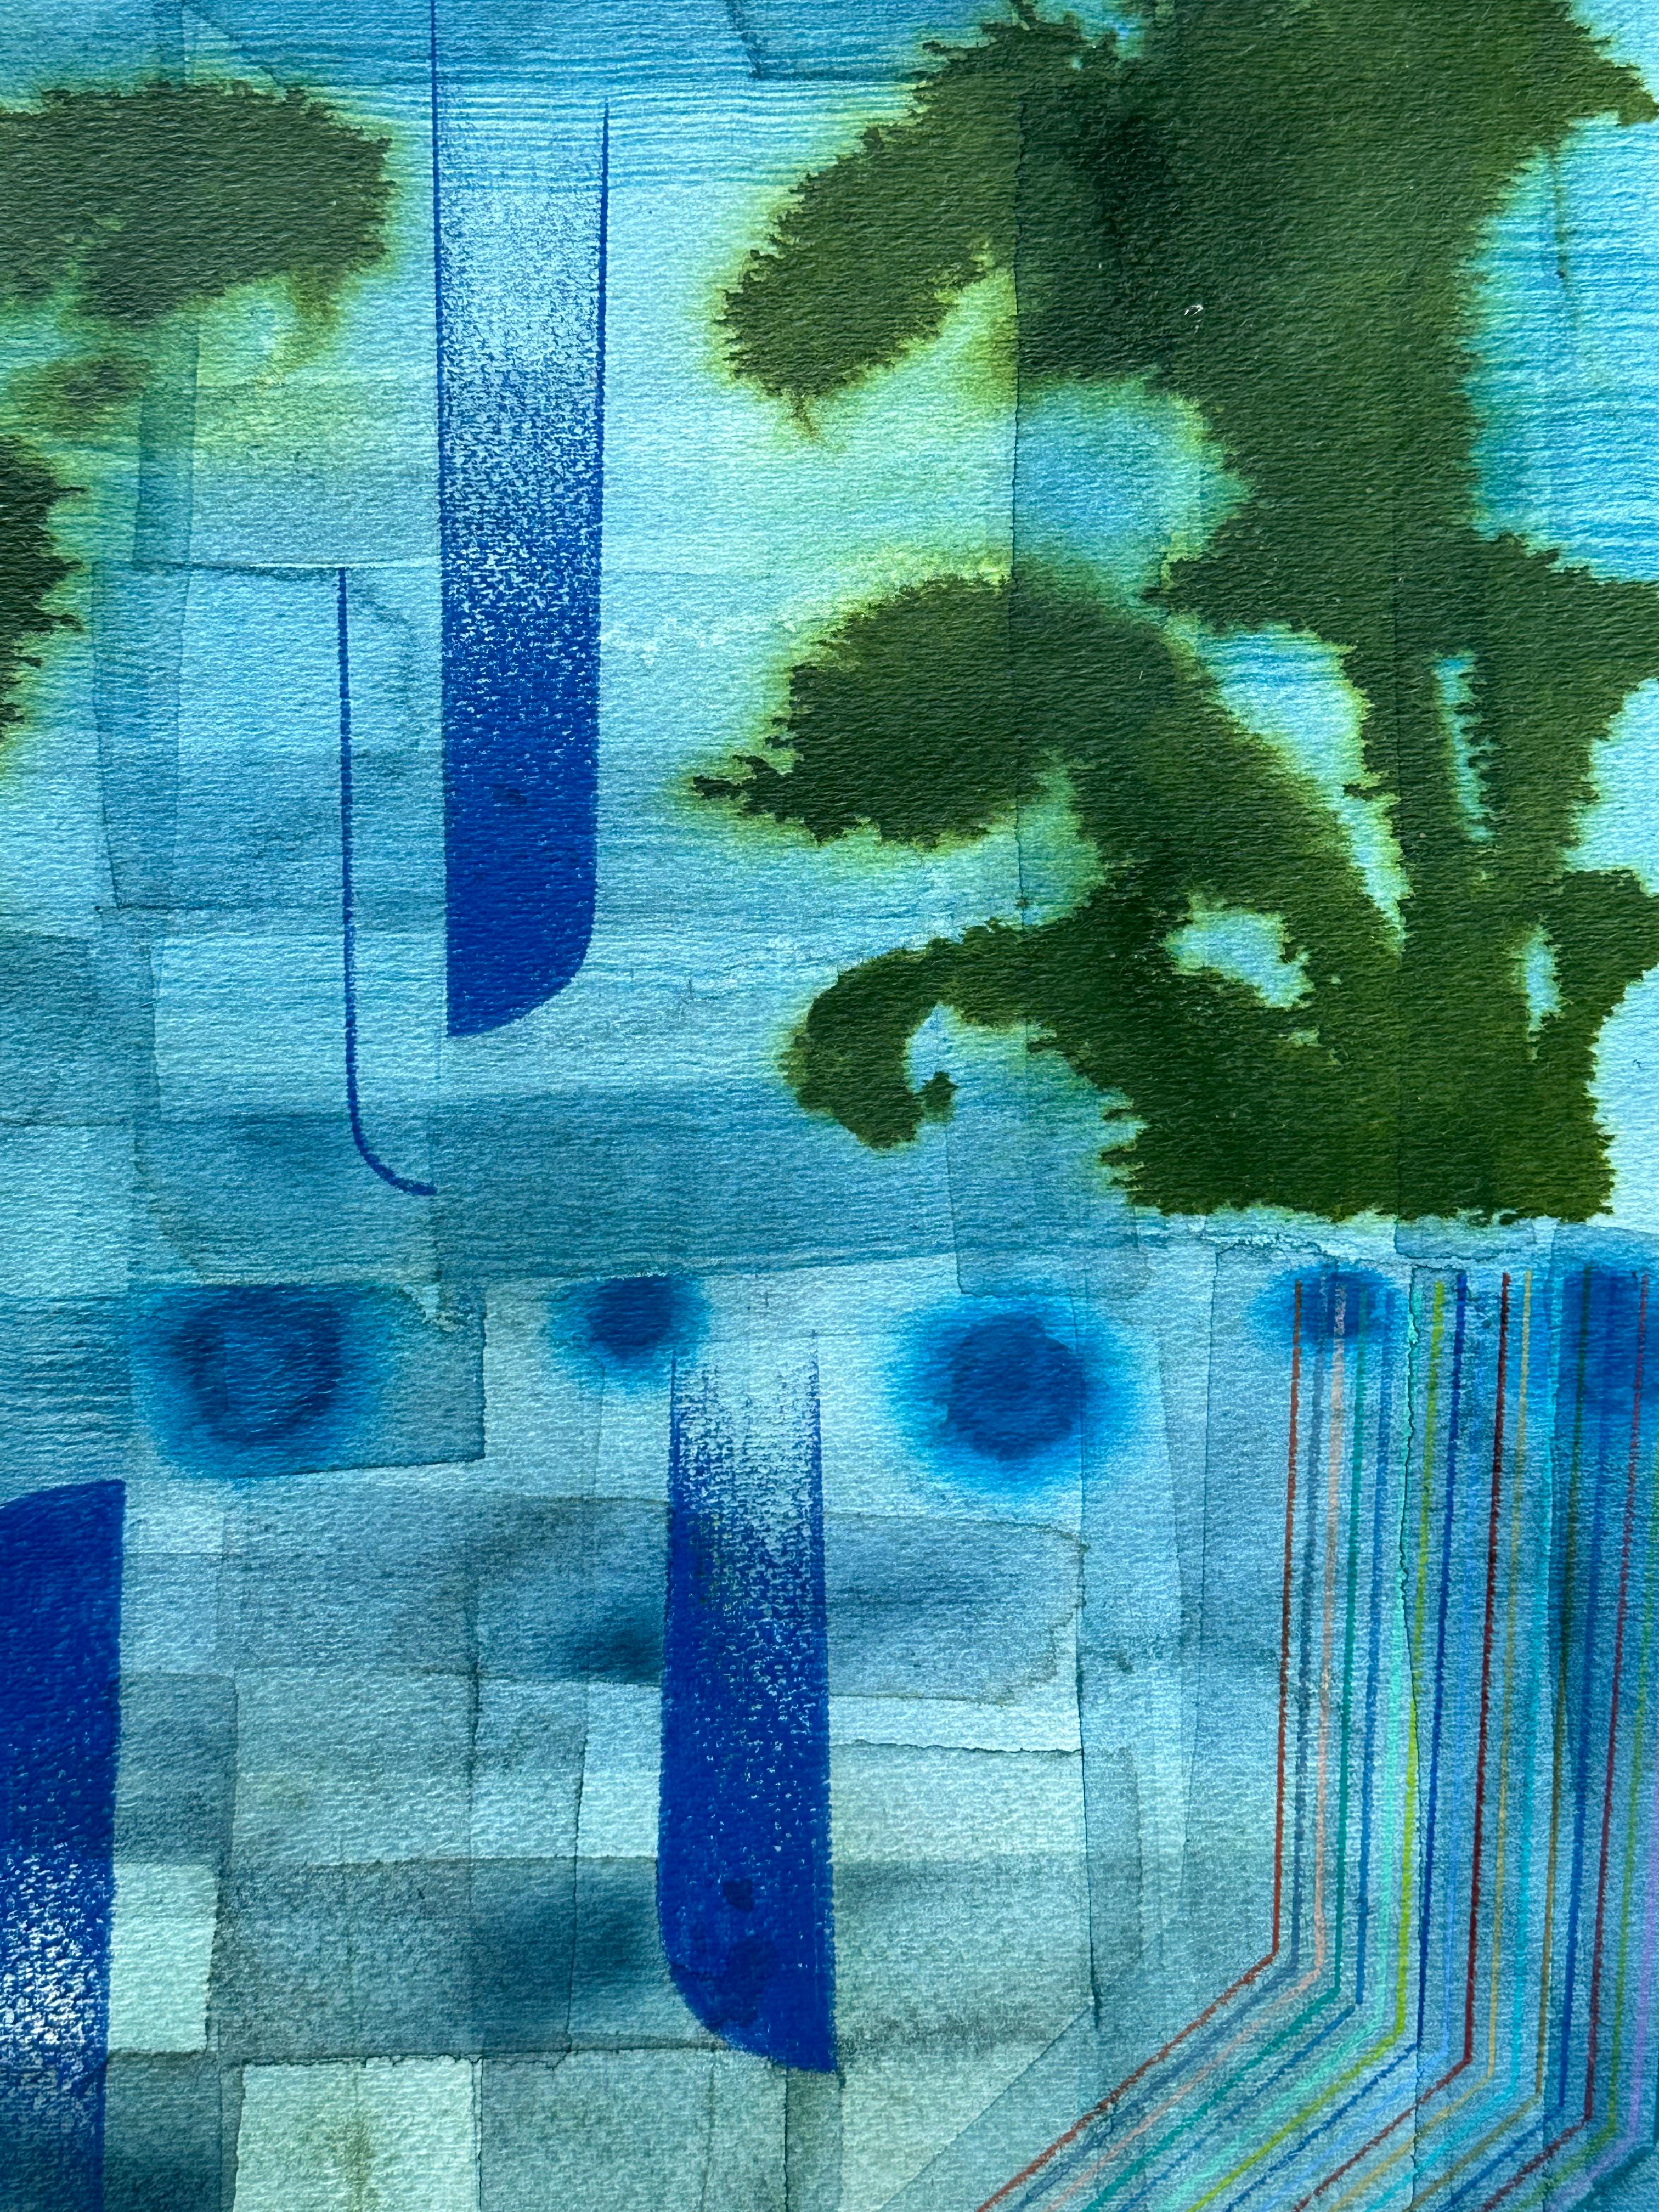 Untitled 606, Teal Blue, Dark Olive Green, Lapis Patterns, Abstract Landscape - Art by Gabe Brown